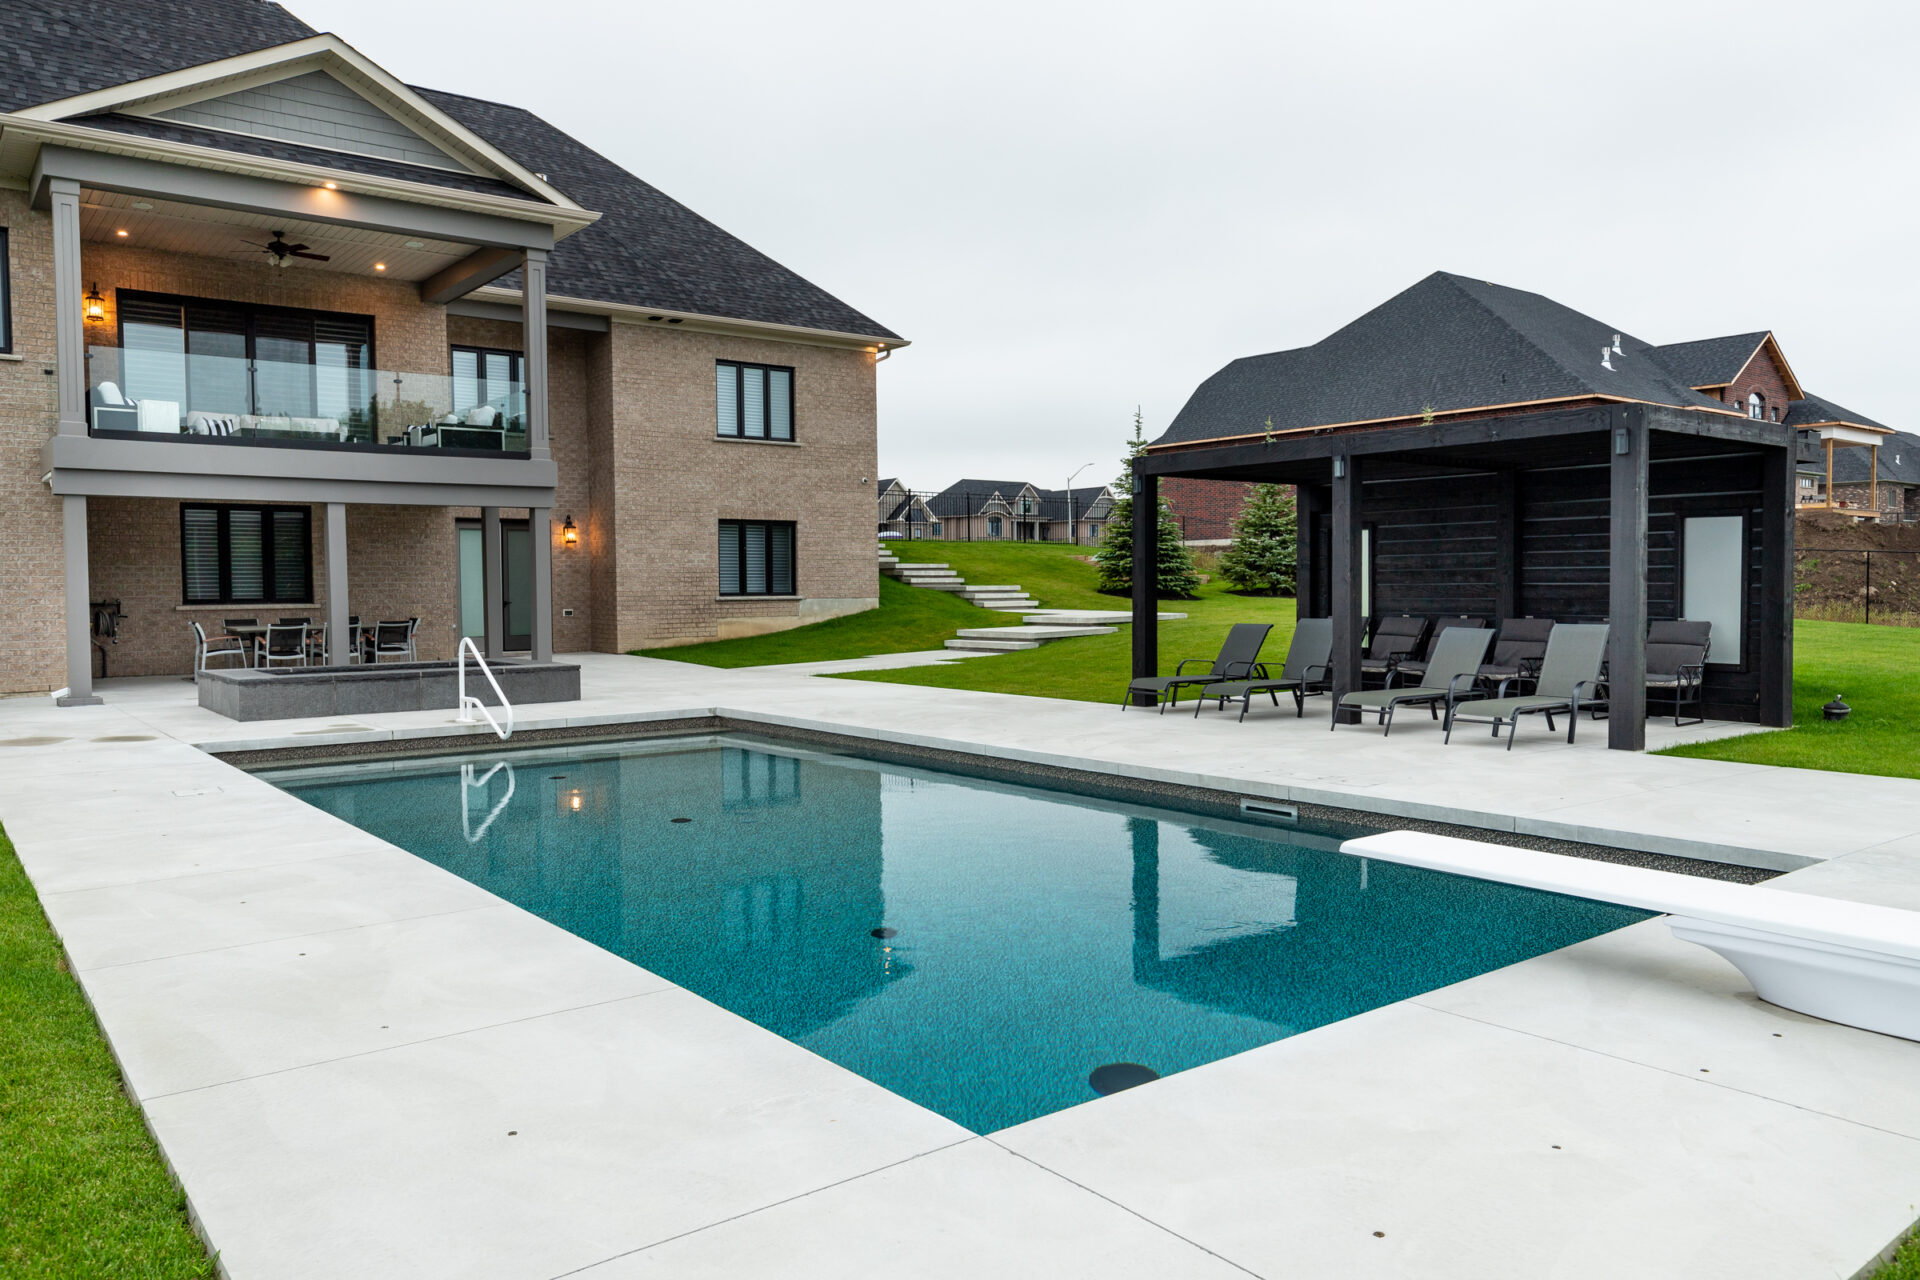 A modern two-story brick house with a balcony overlooks an outdoor rectangular swimming pool. A black pool house and patio chairs nearby complement the scene.